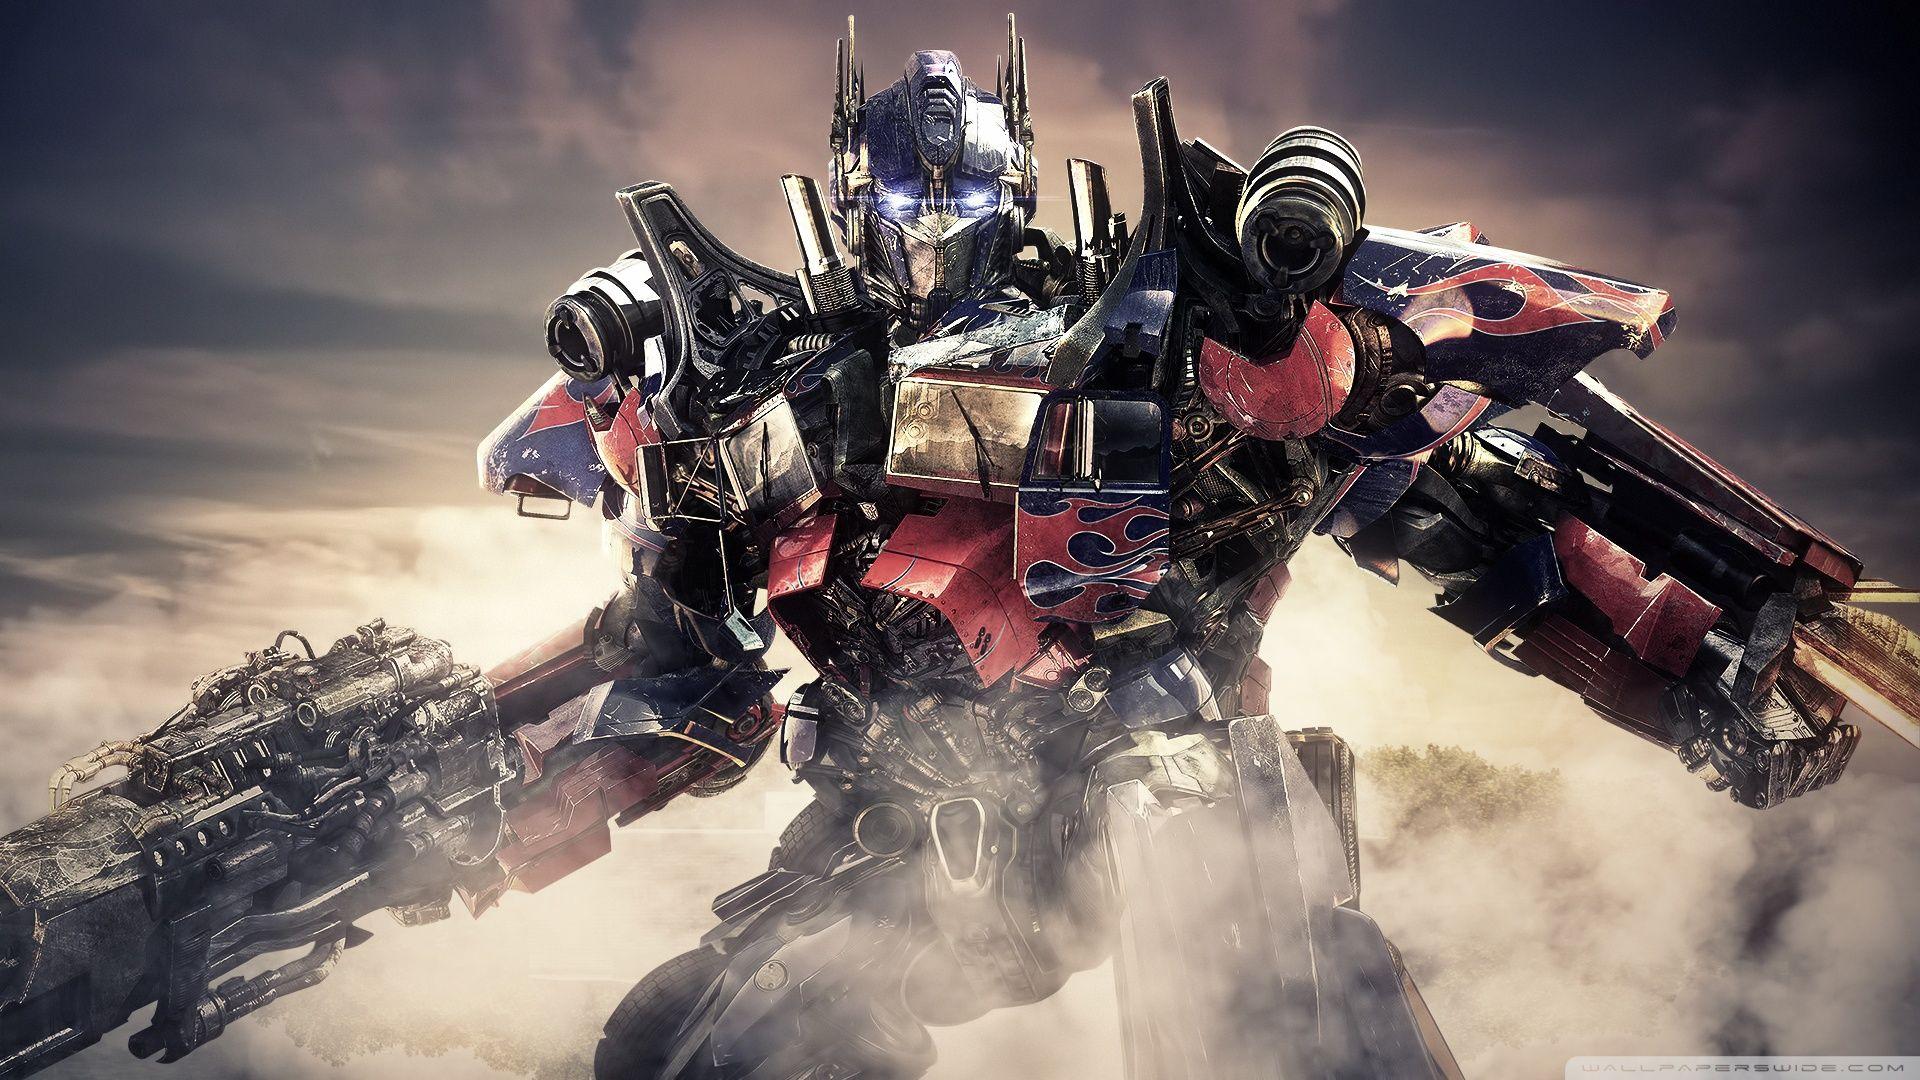 10 Sci Fi Transformers HD Wallpapers and Backgrounds